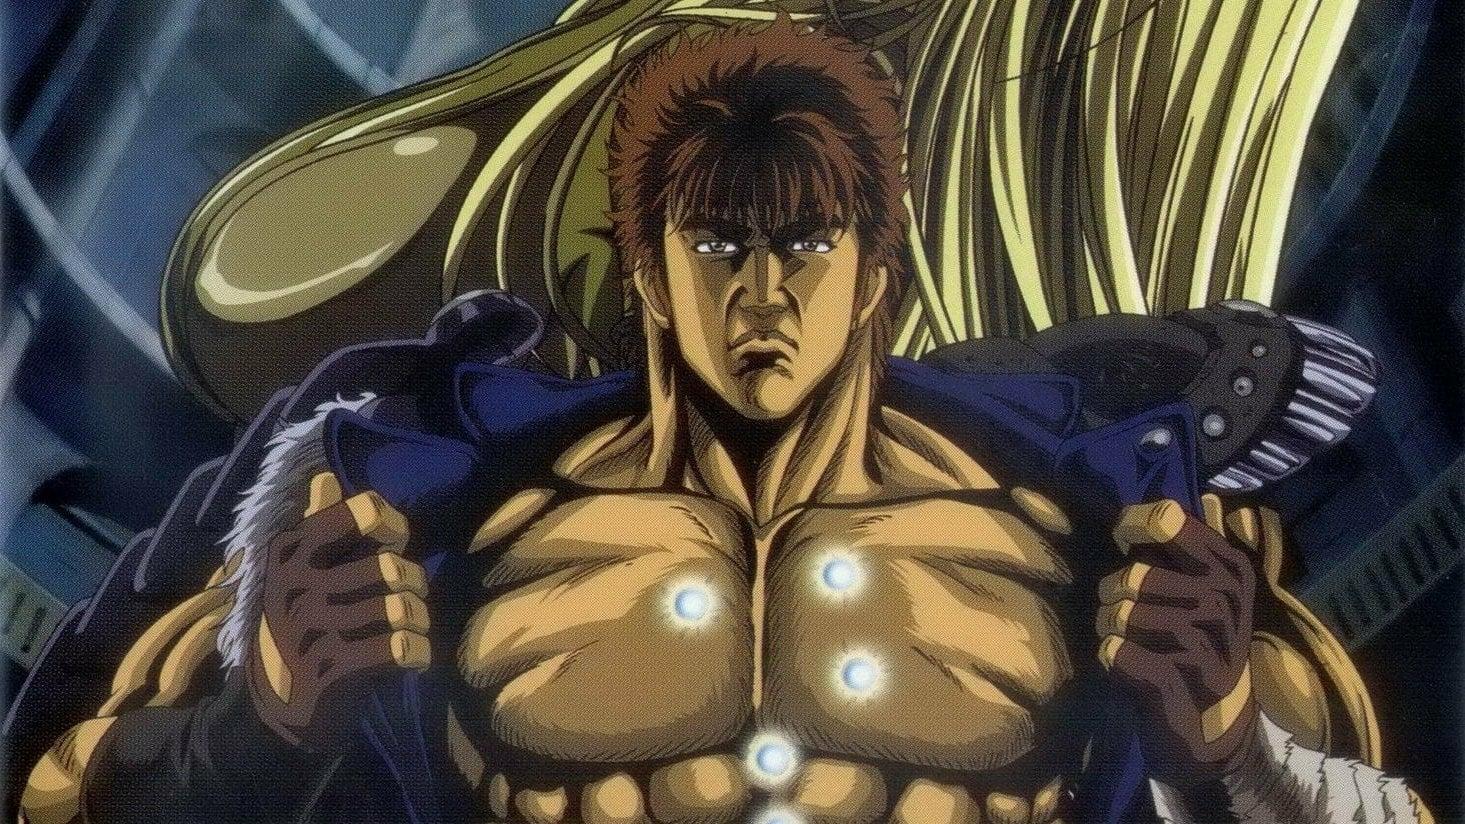 New Fist of the North Star: When a Man Carries Sorrow backdrop